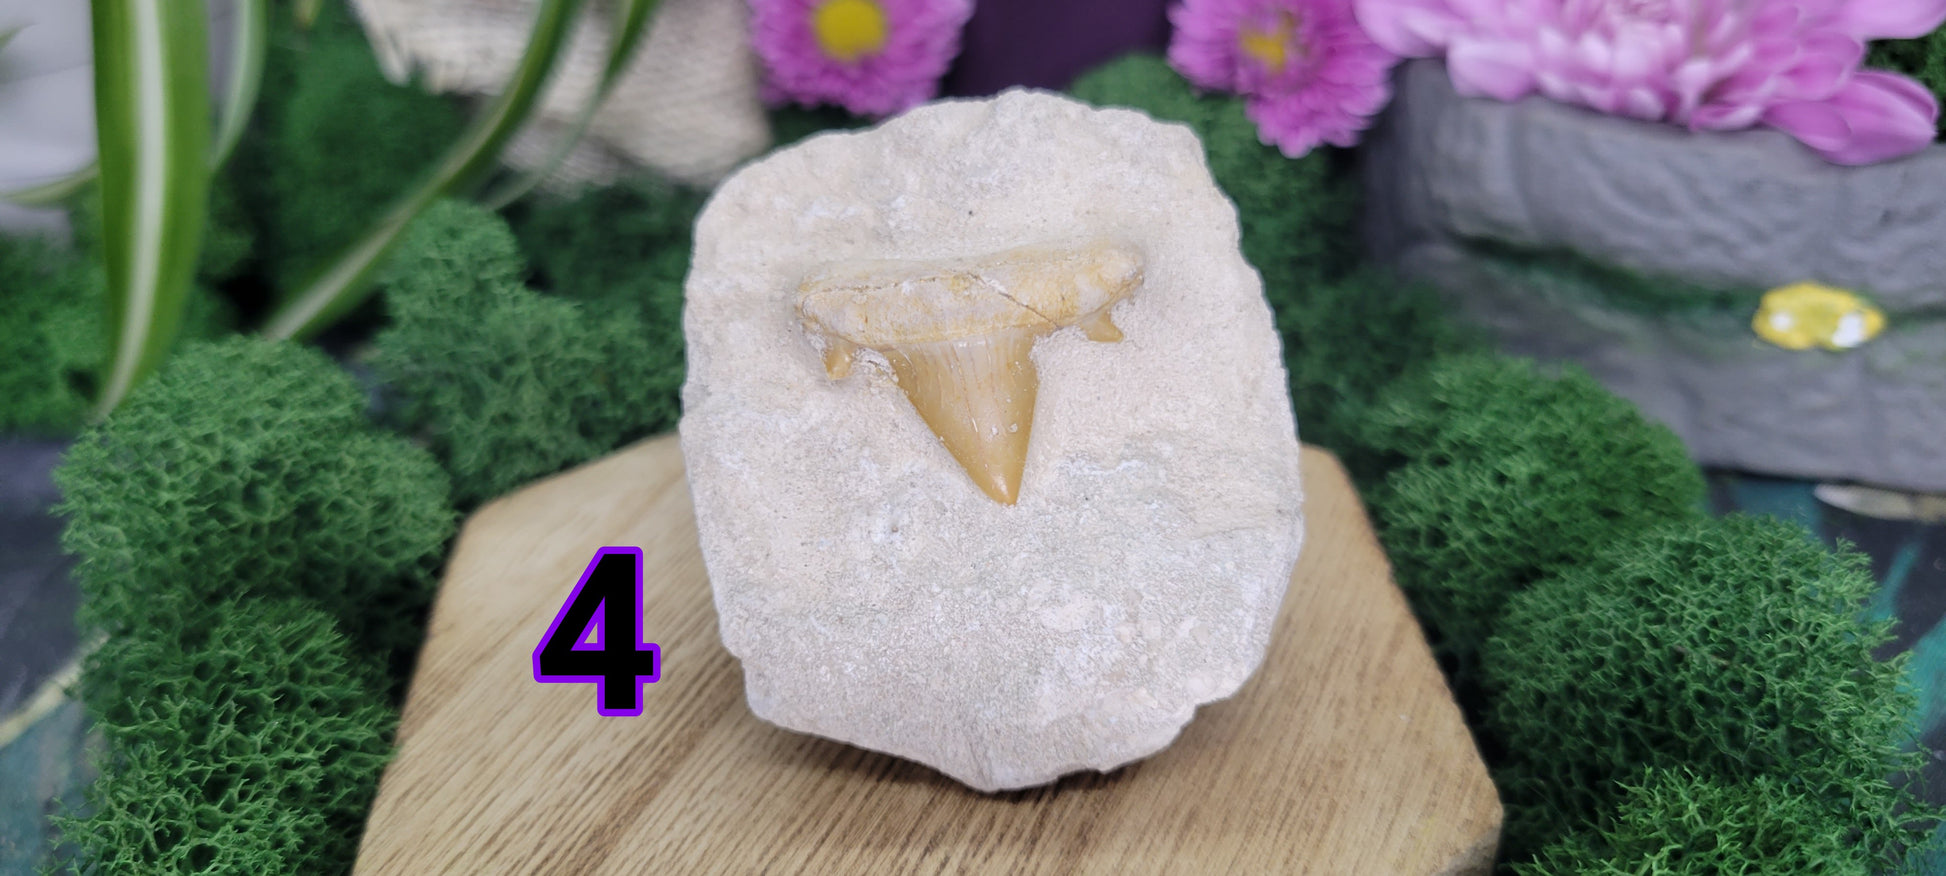 Shark Tooth Fossil in Rock - Rock Bottom Jewelry & Engraving